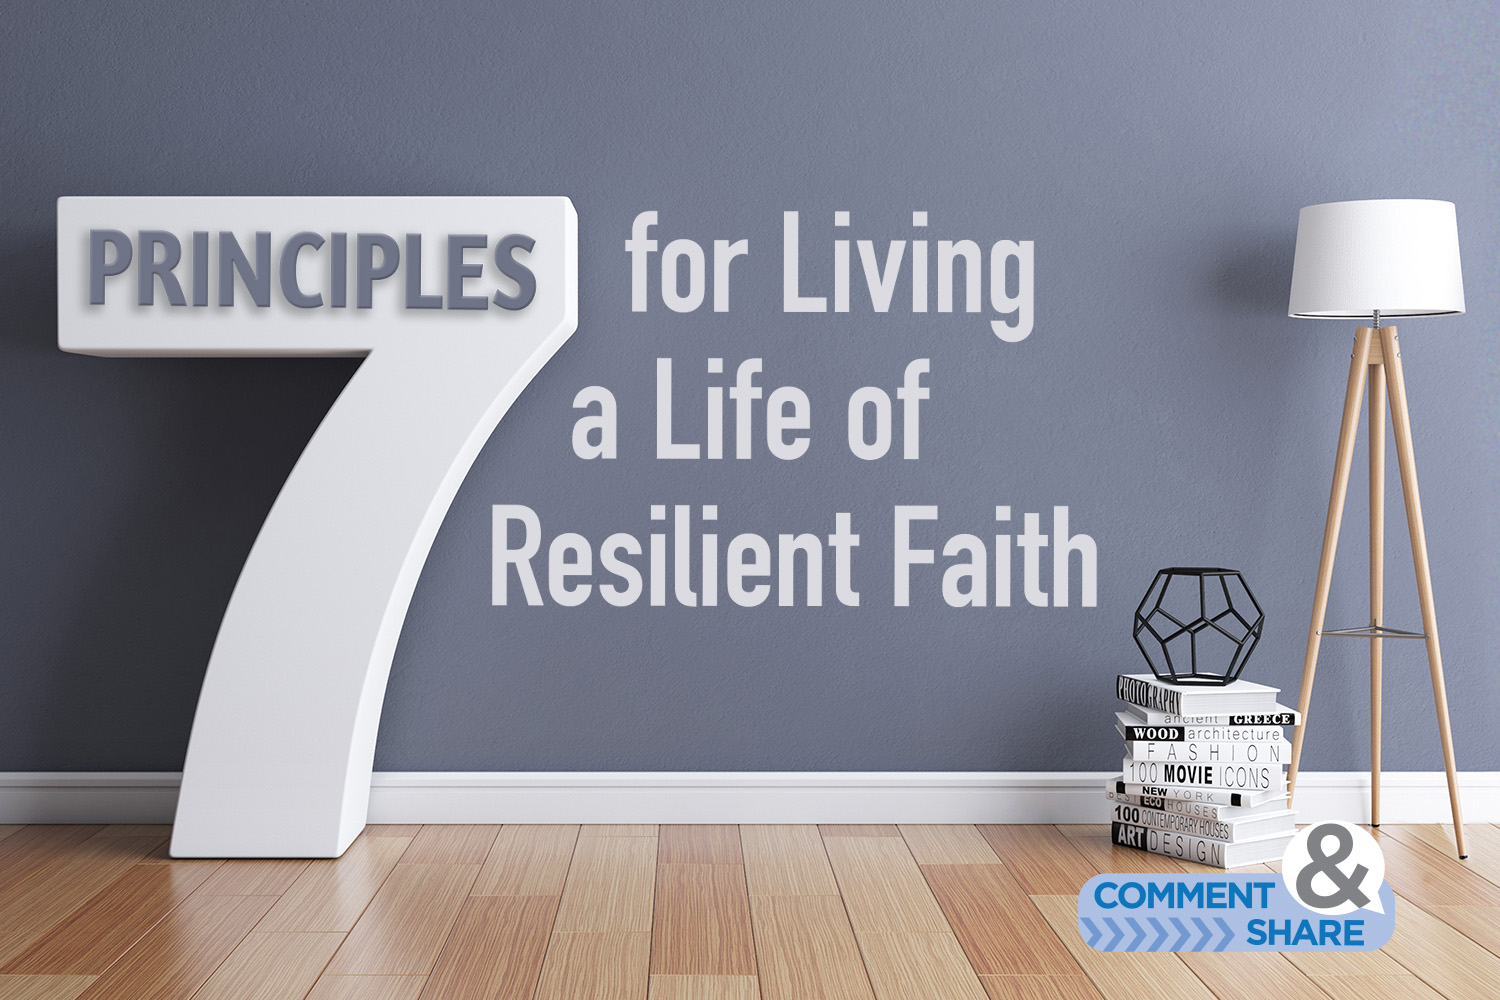 7 Principles for Living a Life of Resilient Faith Blog Post